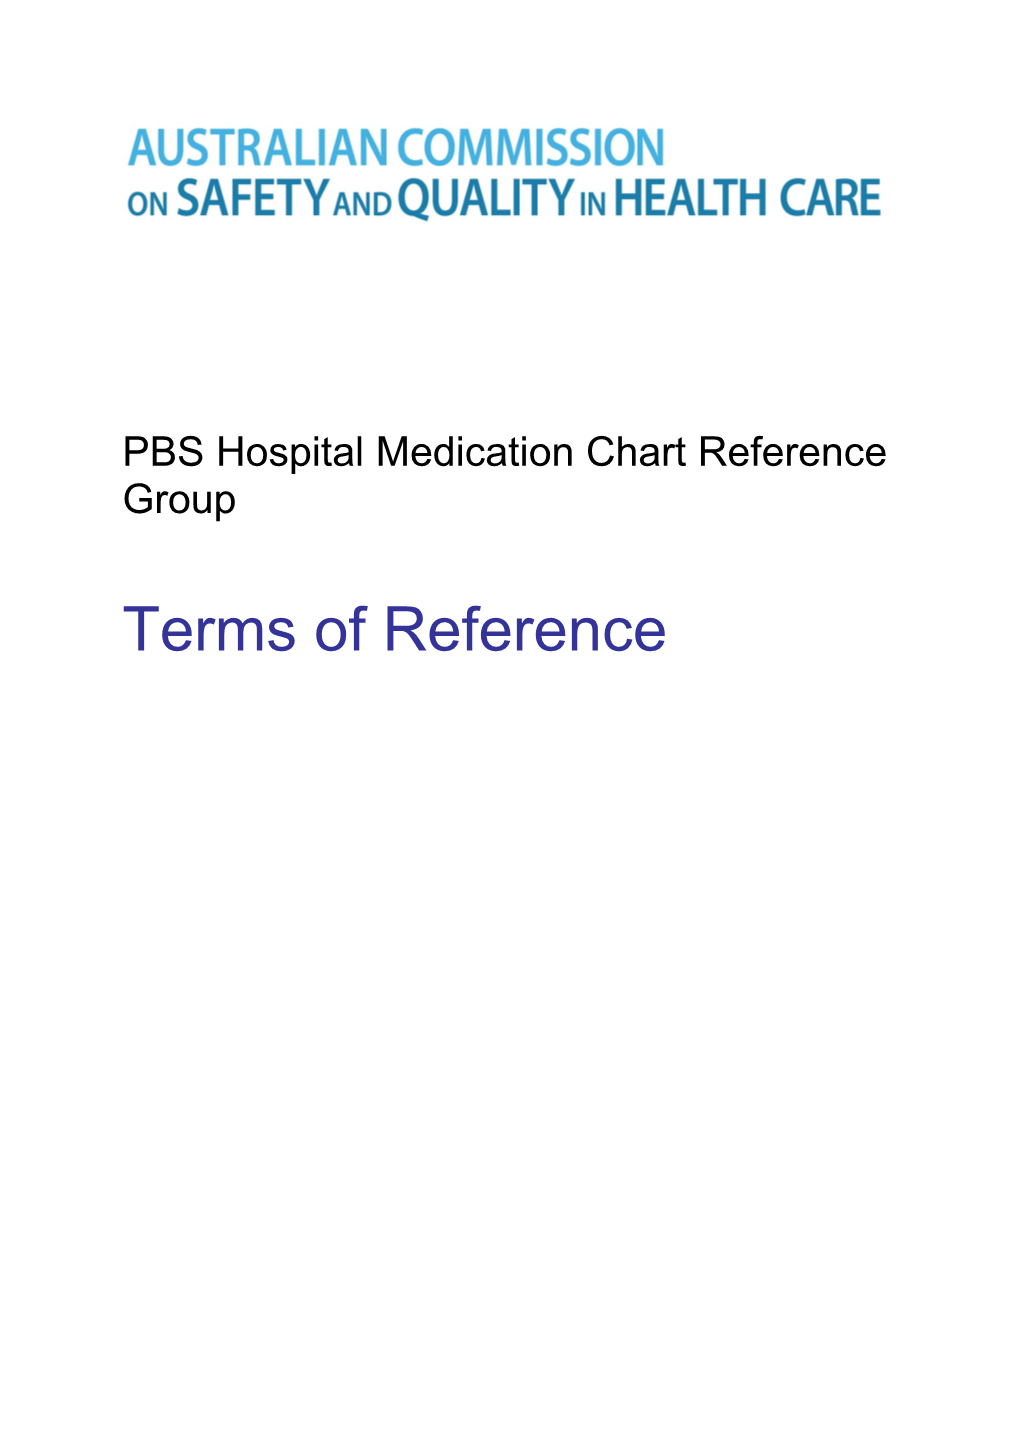 PBS Hospital Medication Chart Reference Group